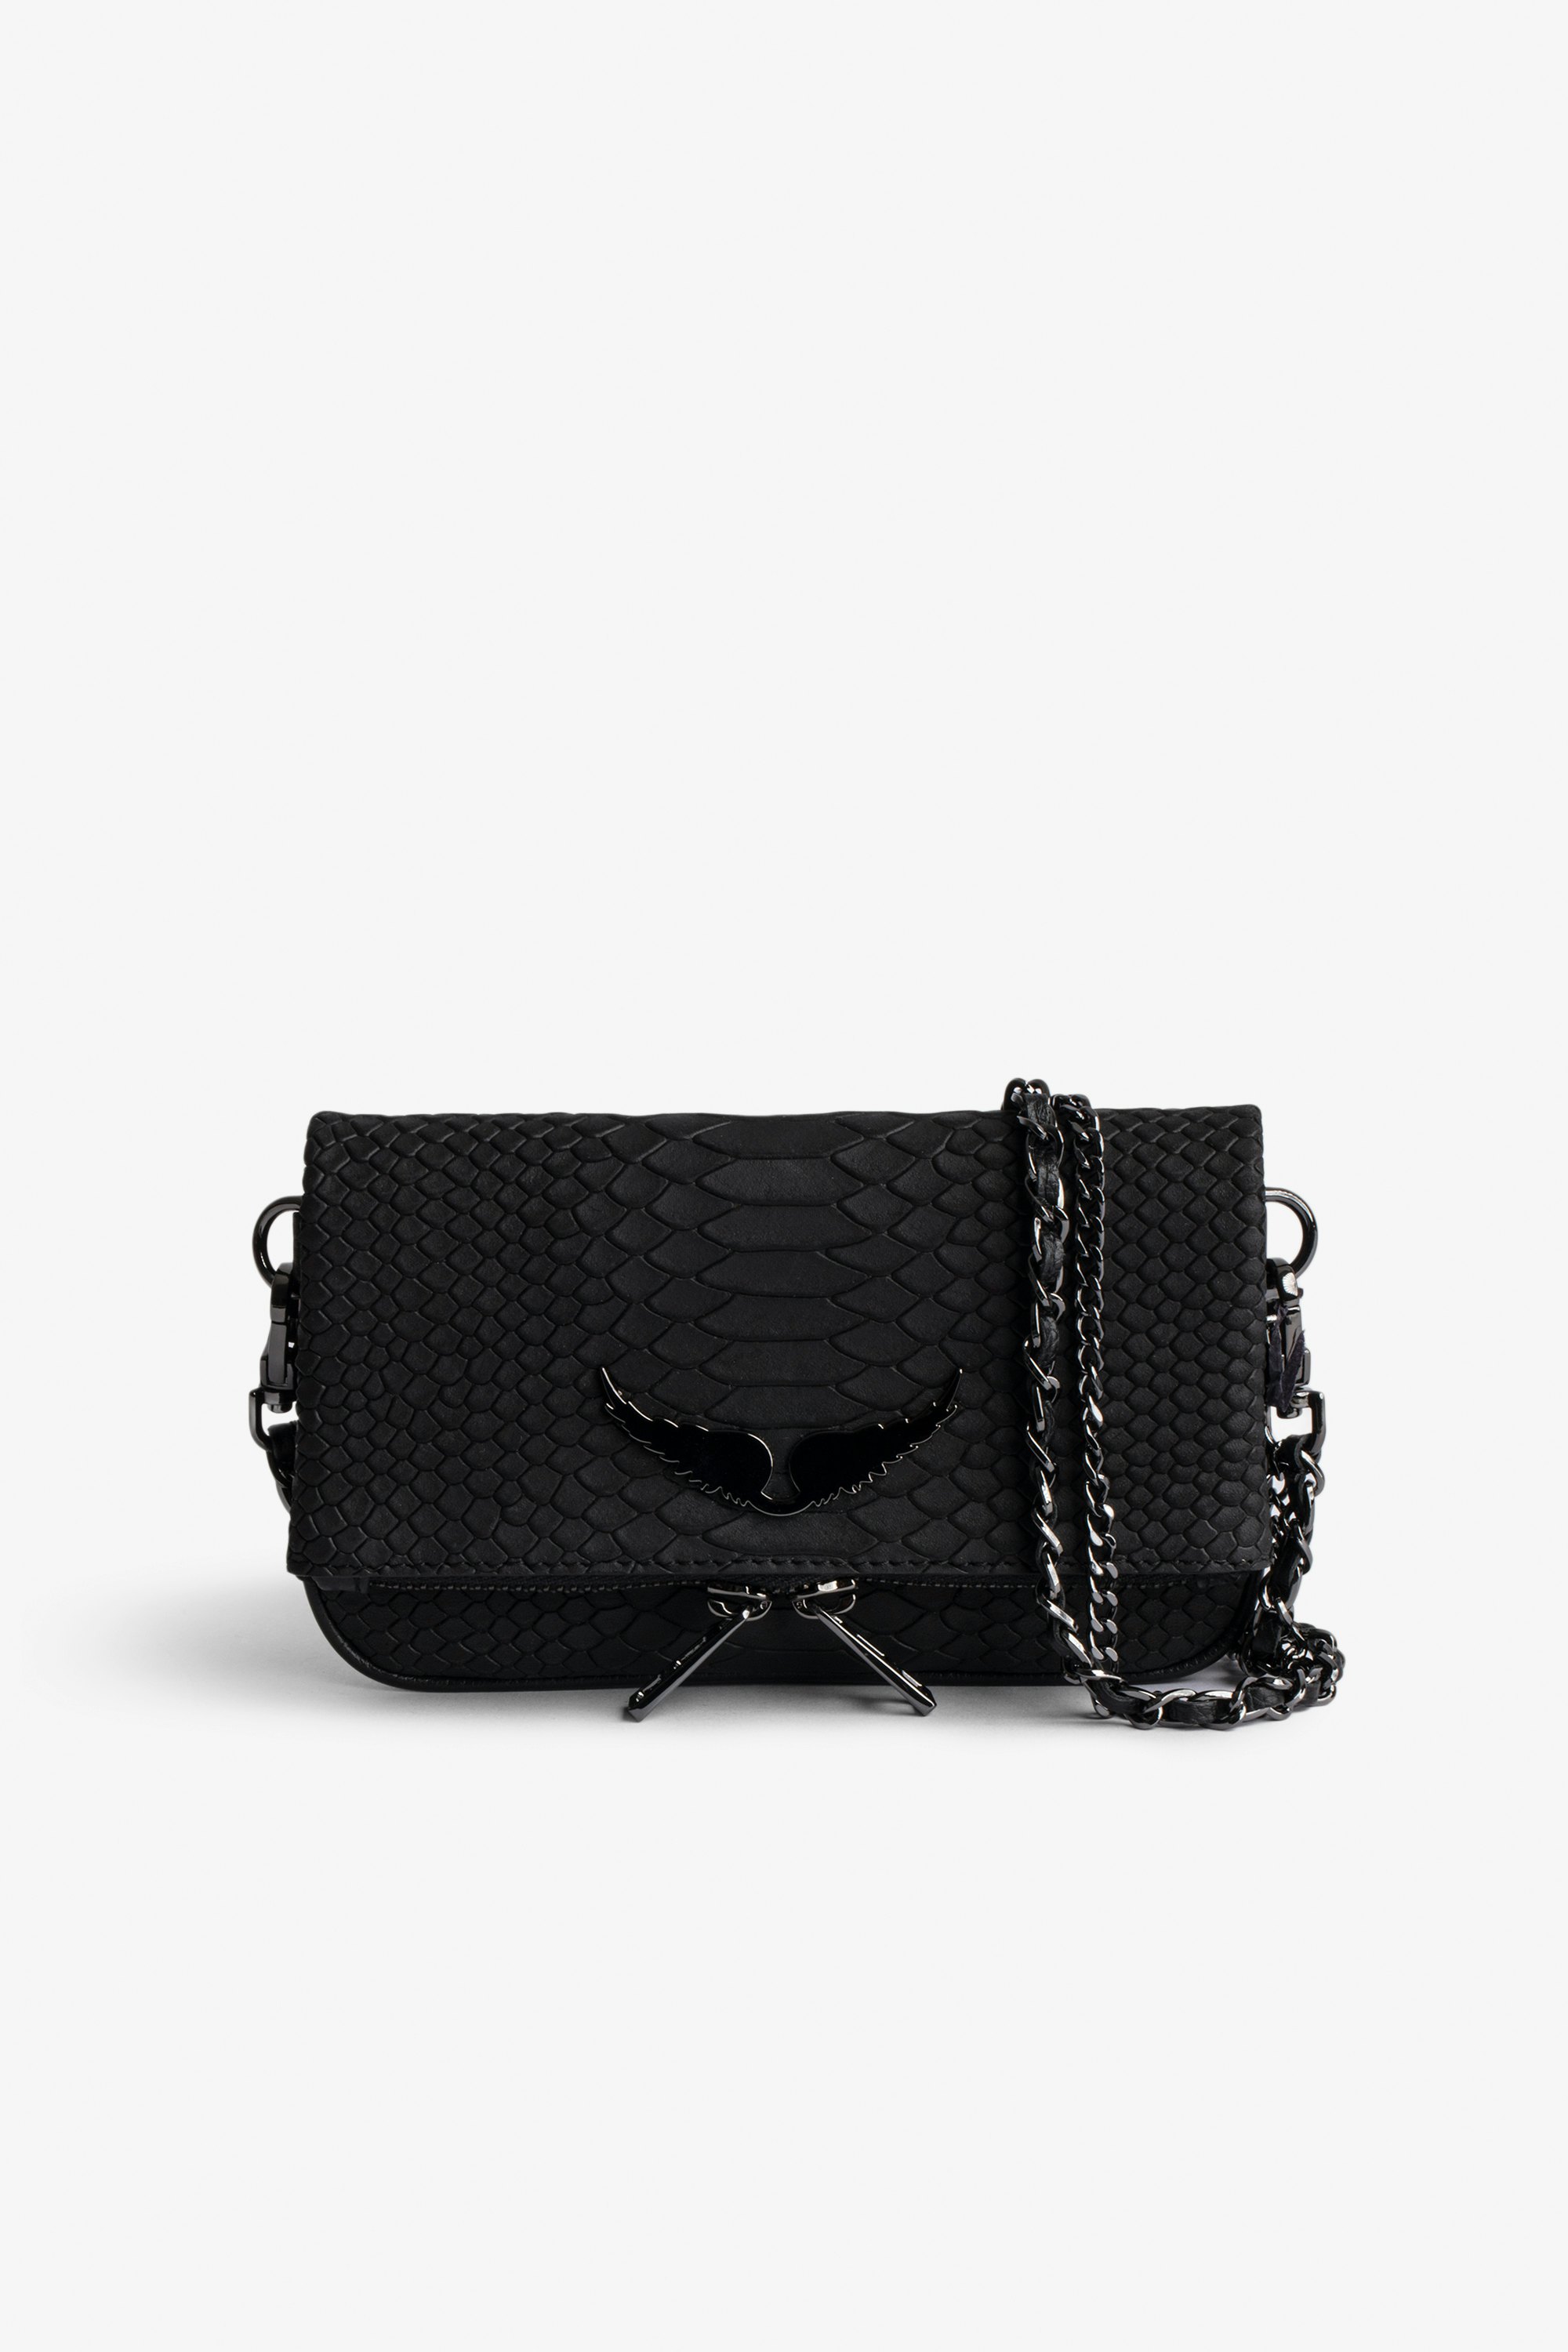 Nano Soft Savage Rock Clutch Women’s small clutch in black python-effect leather with double leather-and-metal chain